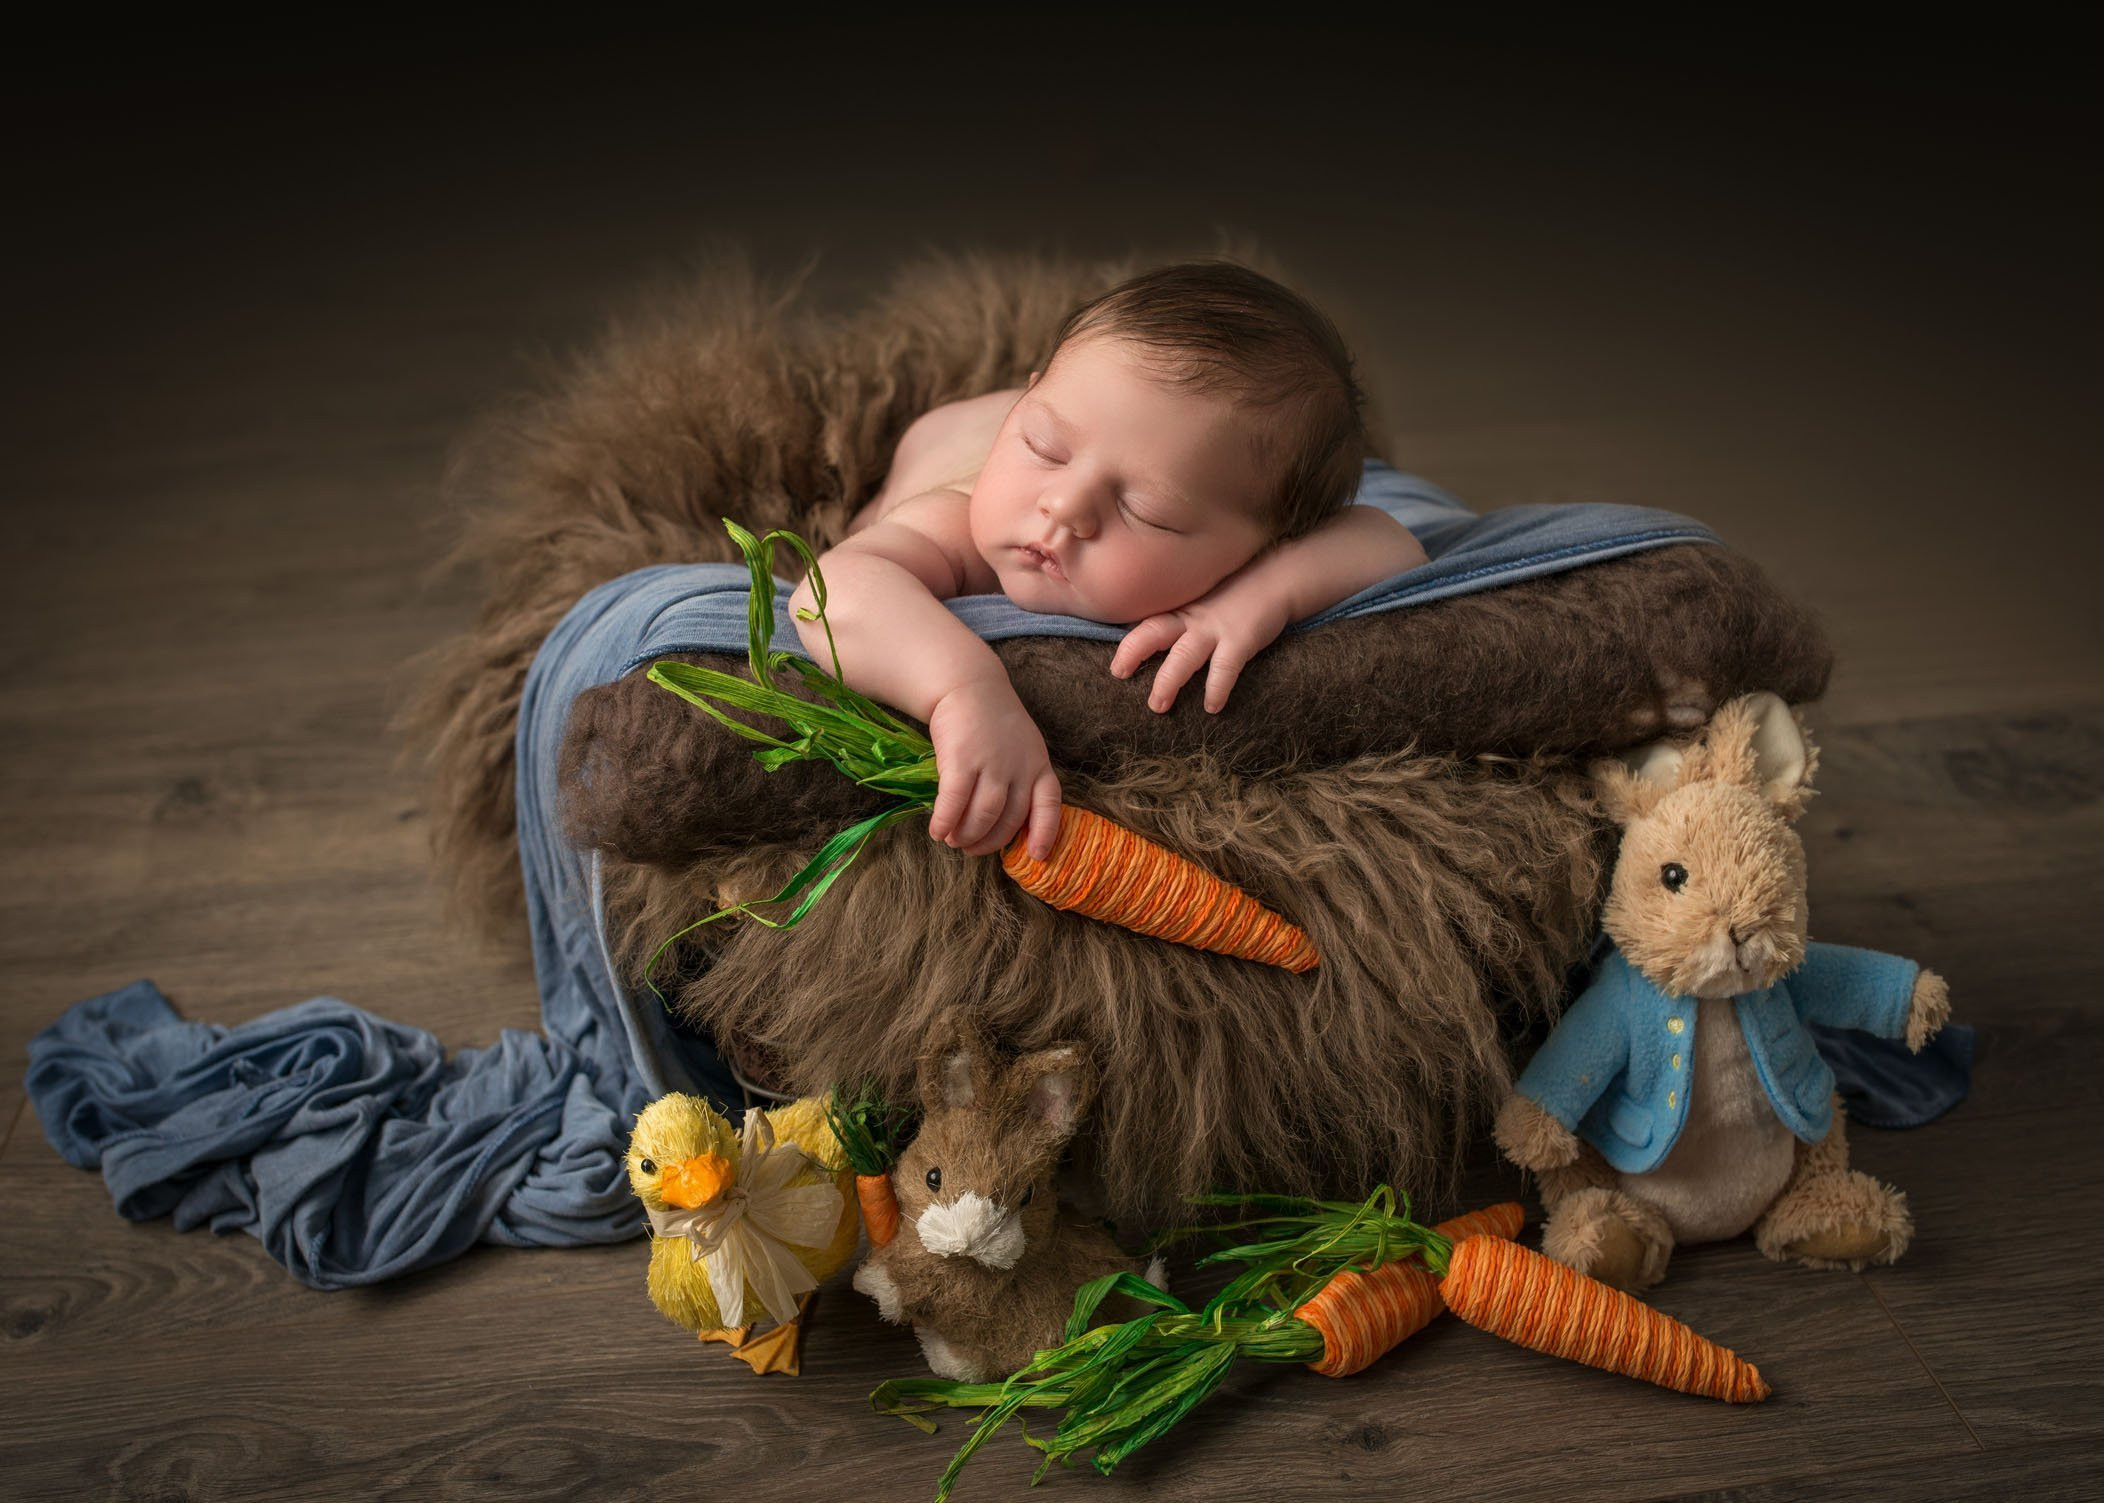 Baby Easter Photo Ideas
 32 Easter graphy Ideas for Your Family